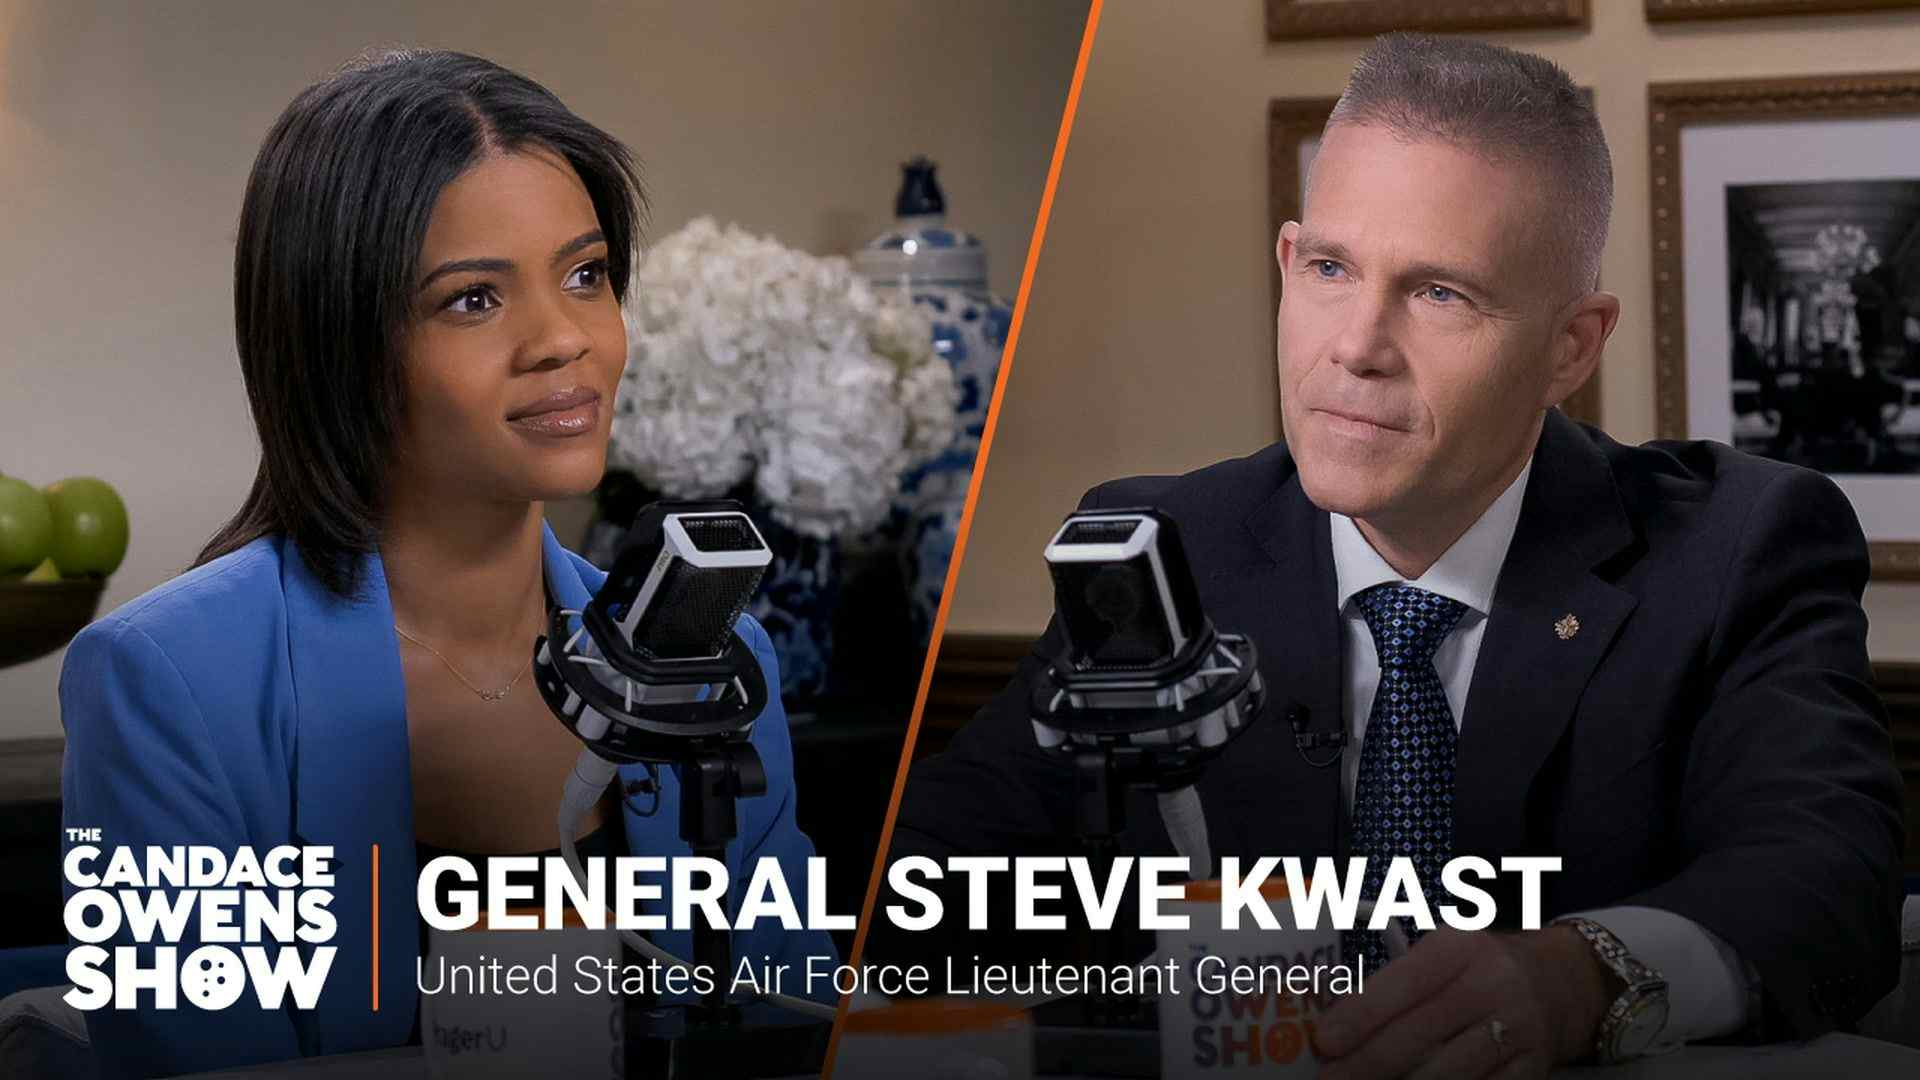 The Candace Owens Show: General Steve Kwast